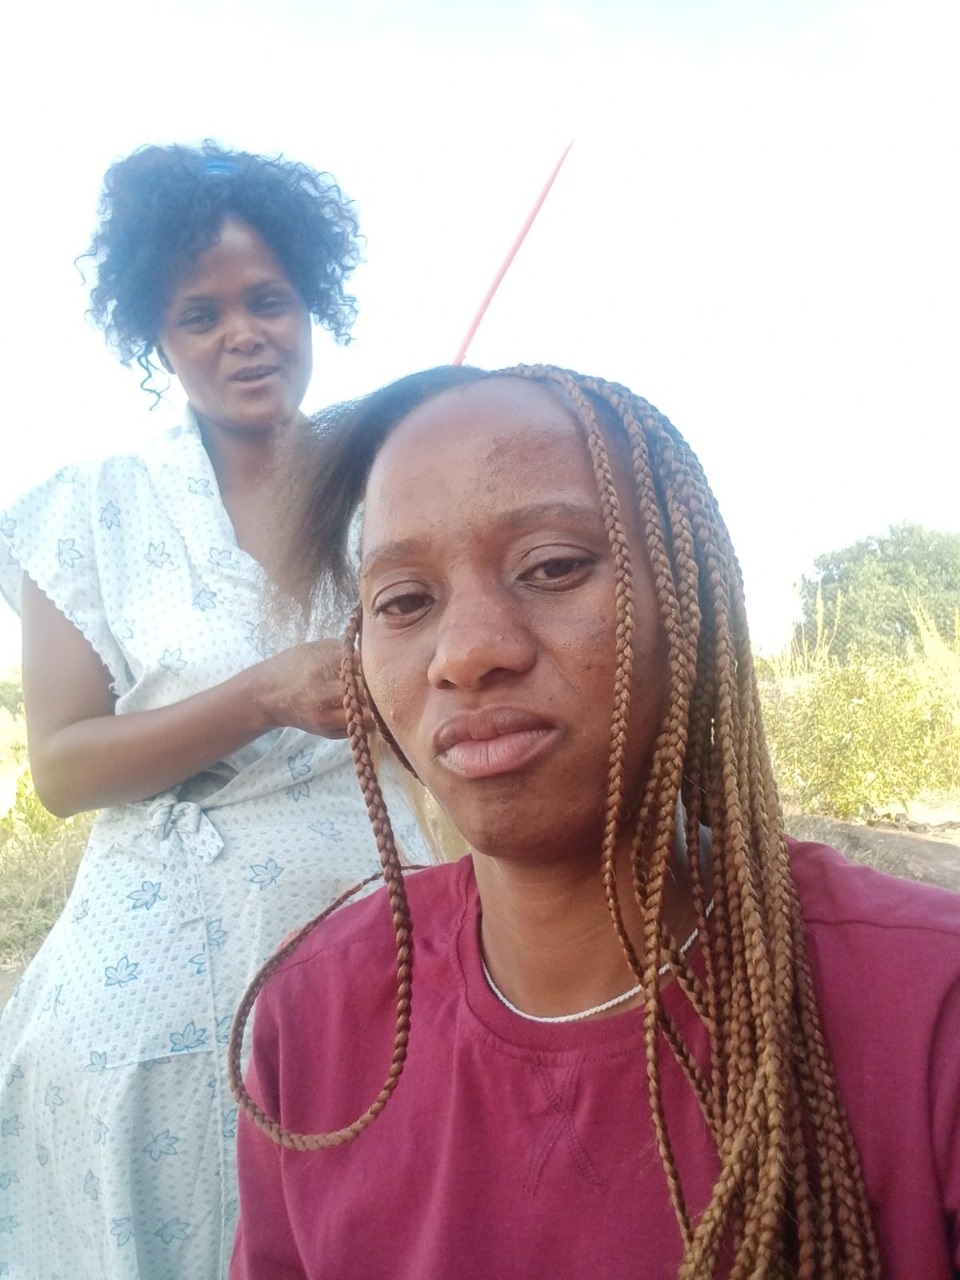 Hairdresser Victoria Makgoo with her client, Tshepiso Thobejane.